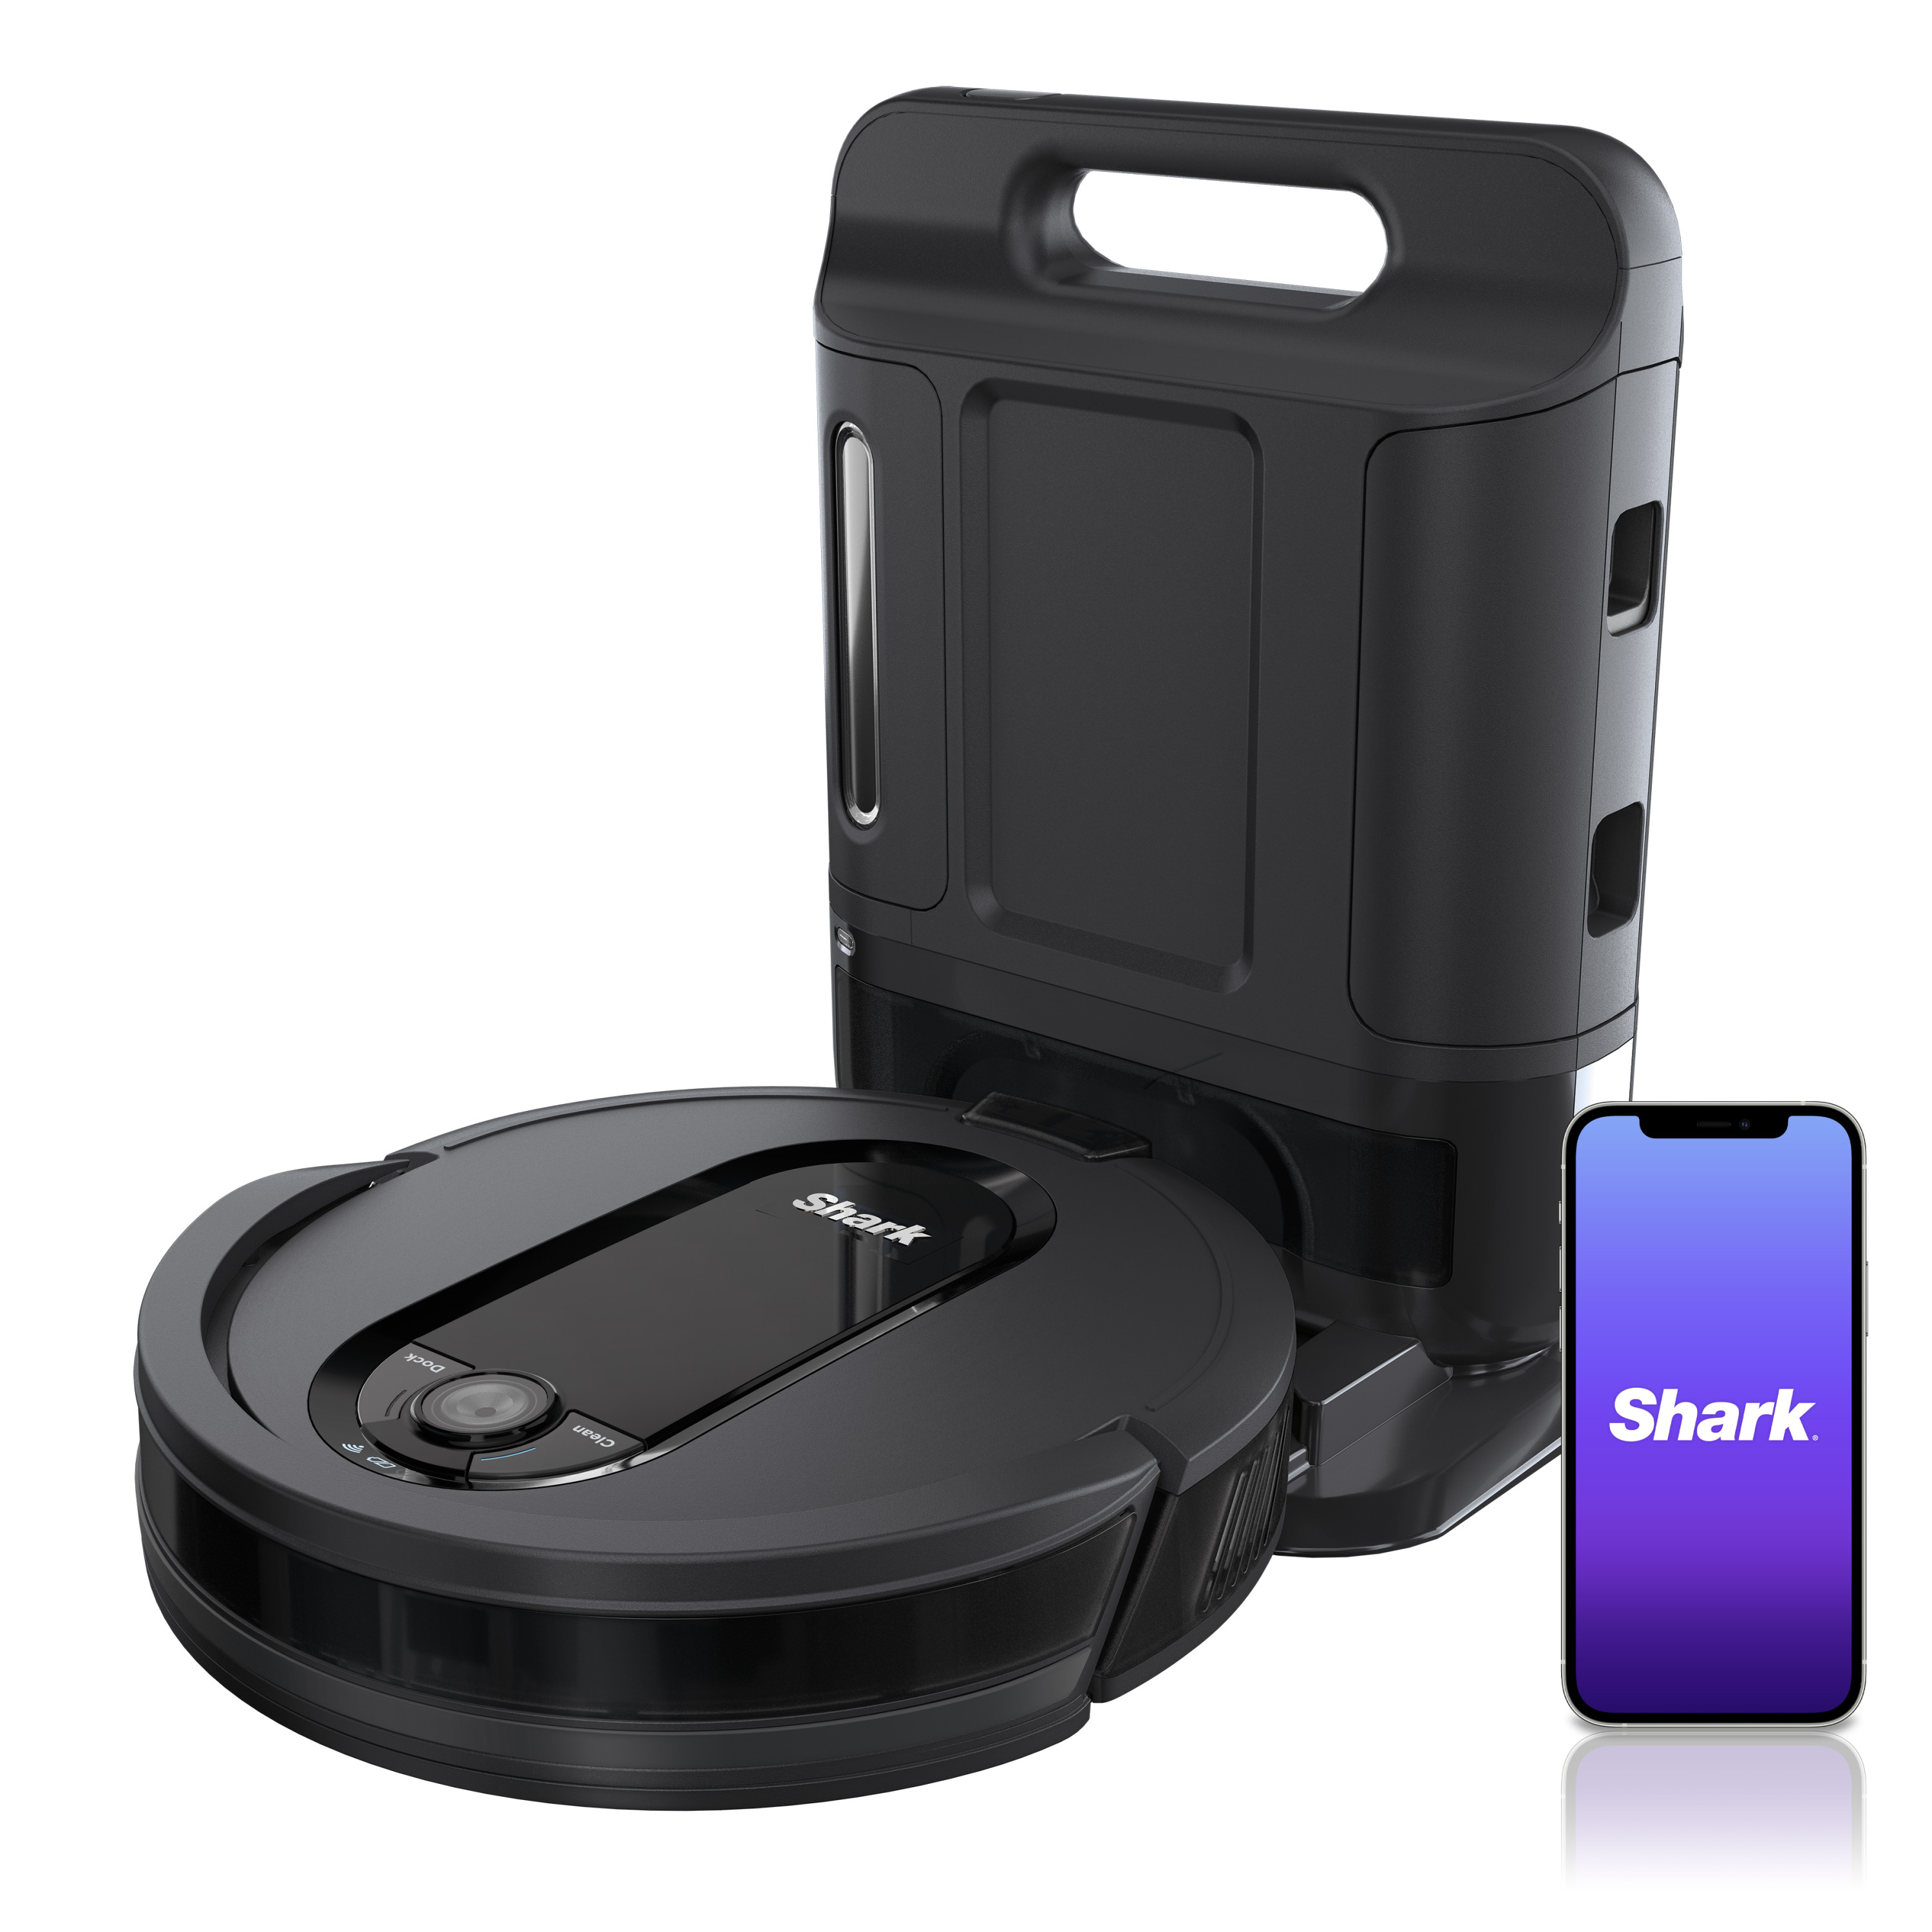 Shark IQ Robot Vacuum with XL Self-Empty Base, Home Mapping, Self-Cleaning Brushroll, Wi-Fi,RV1000AE - image 1 of 11